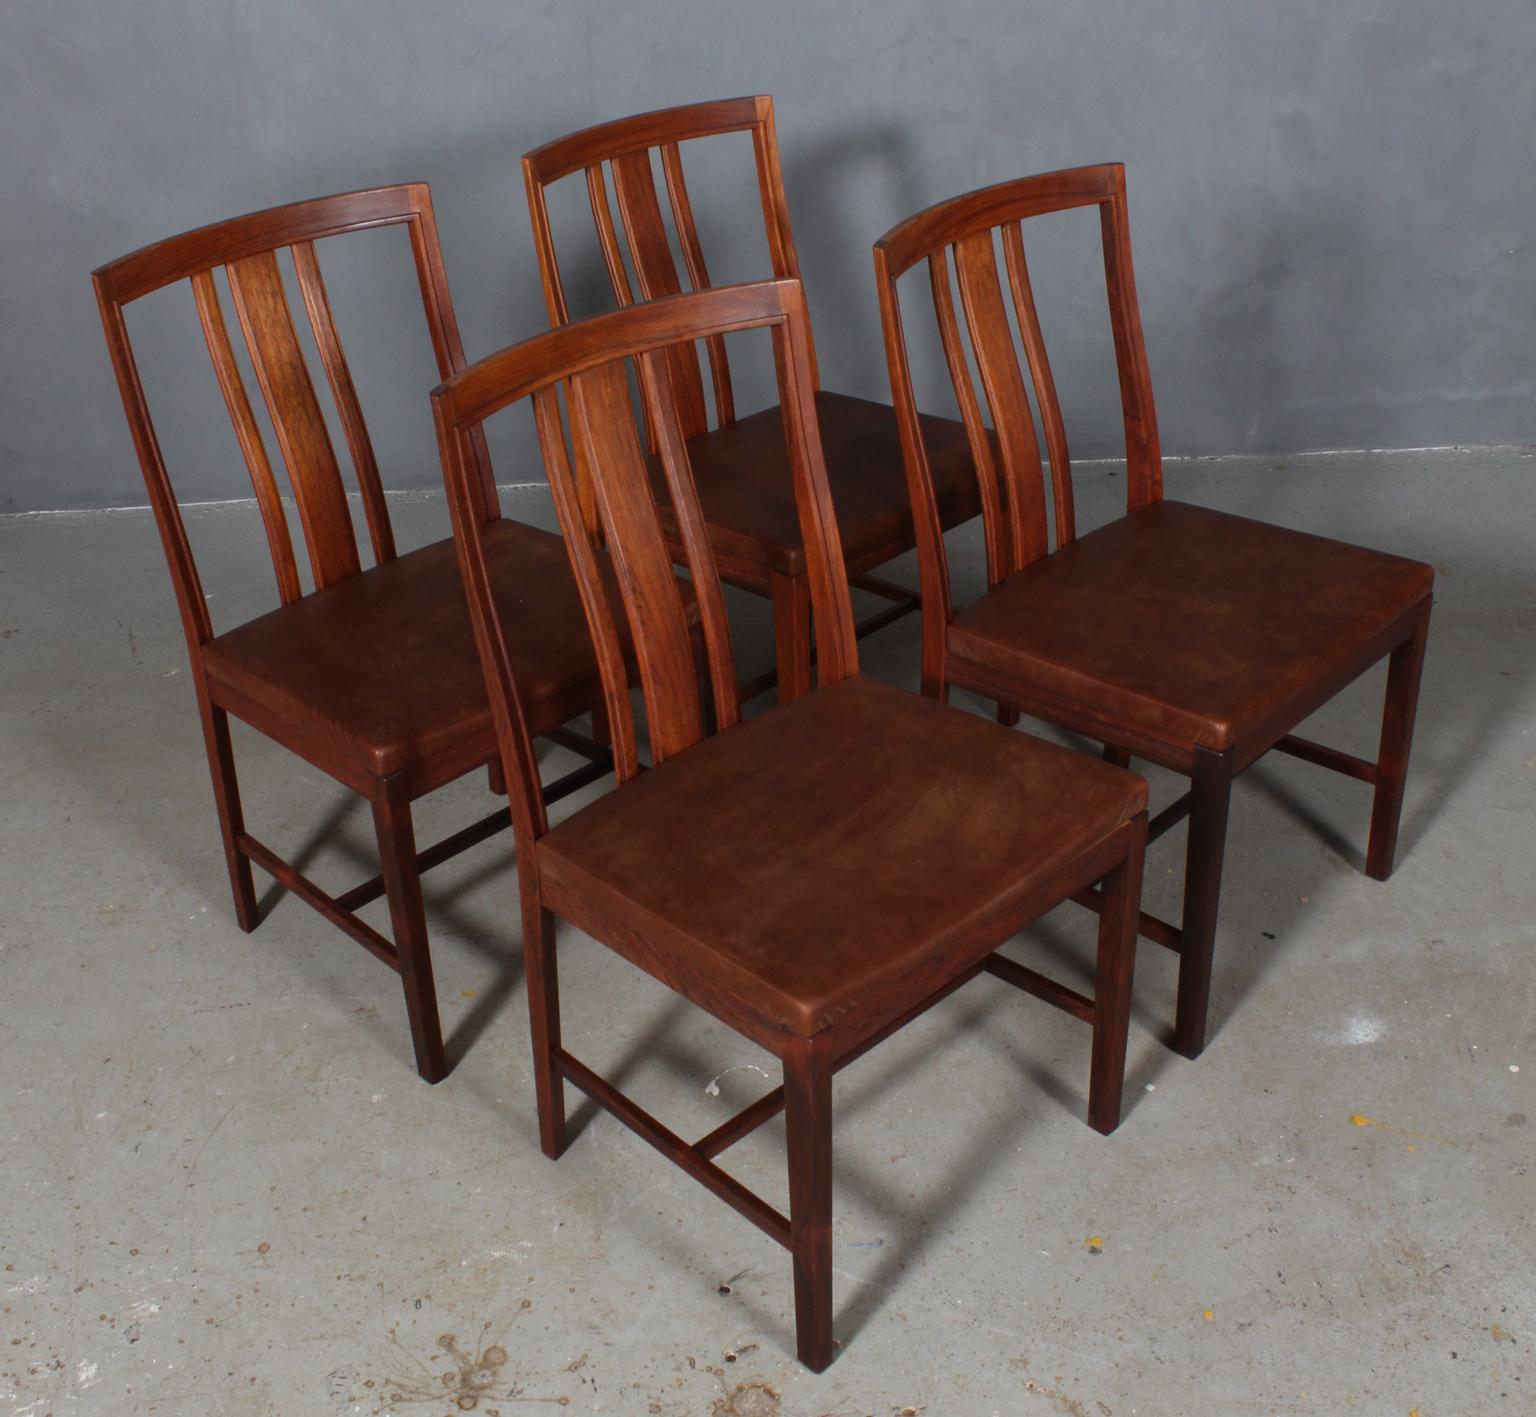 Bertil Fridhagen set of four dining chairs in rosewood.

New upholstered with brown vintage aniline leather. 

Made by Bodafors.